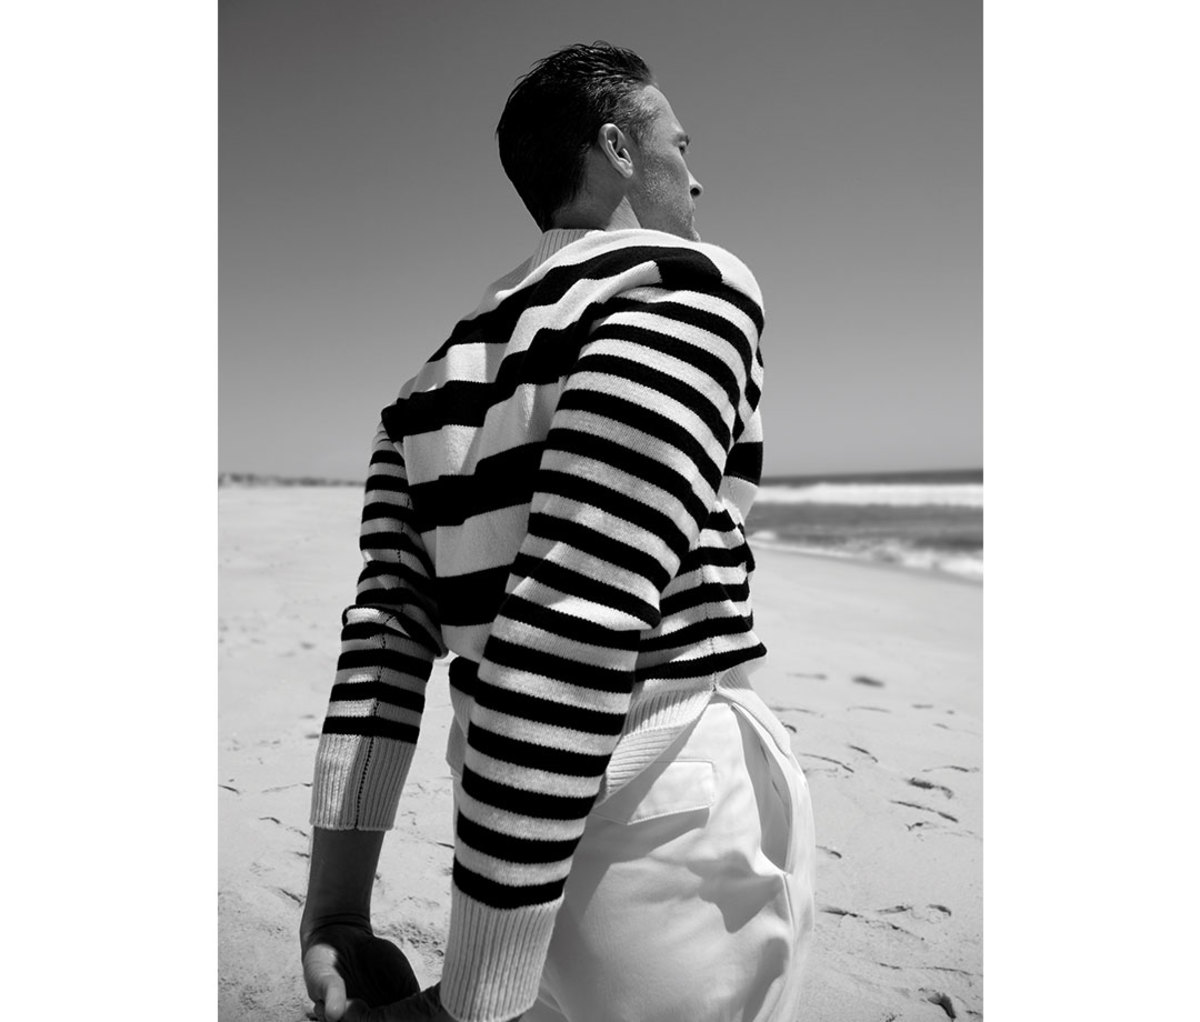 Black and white photo of man wearing striped sweater on beach